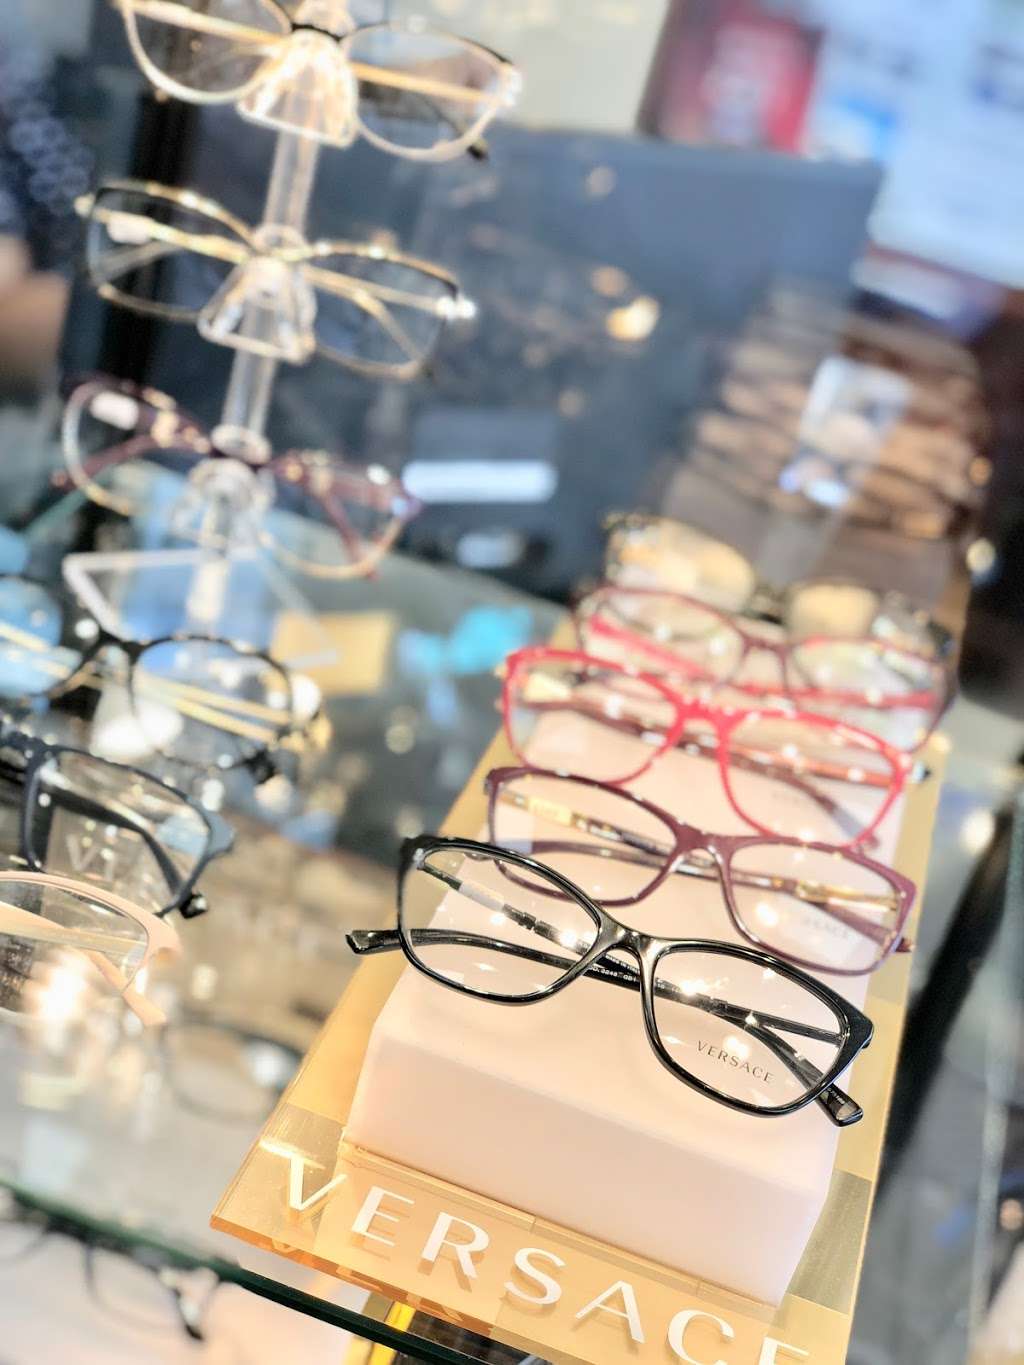 View Optical Eyeglasses Store | 4079 Mowry Ave, Fremont, CA 94538, USA | Phone: (510) 793-8997